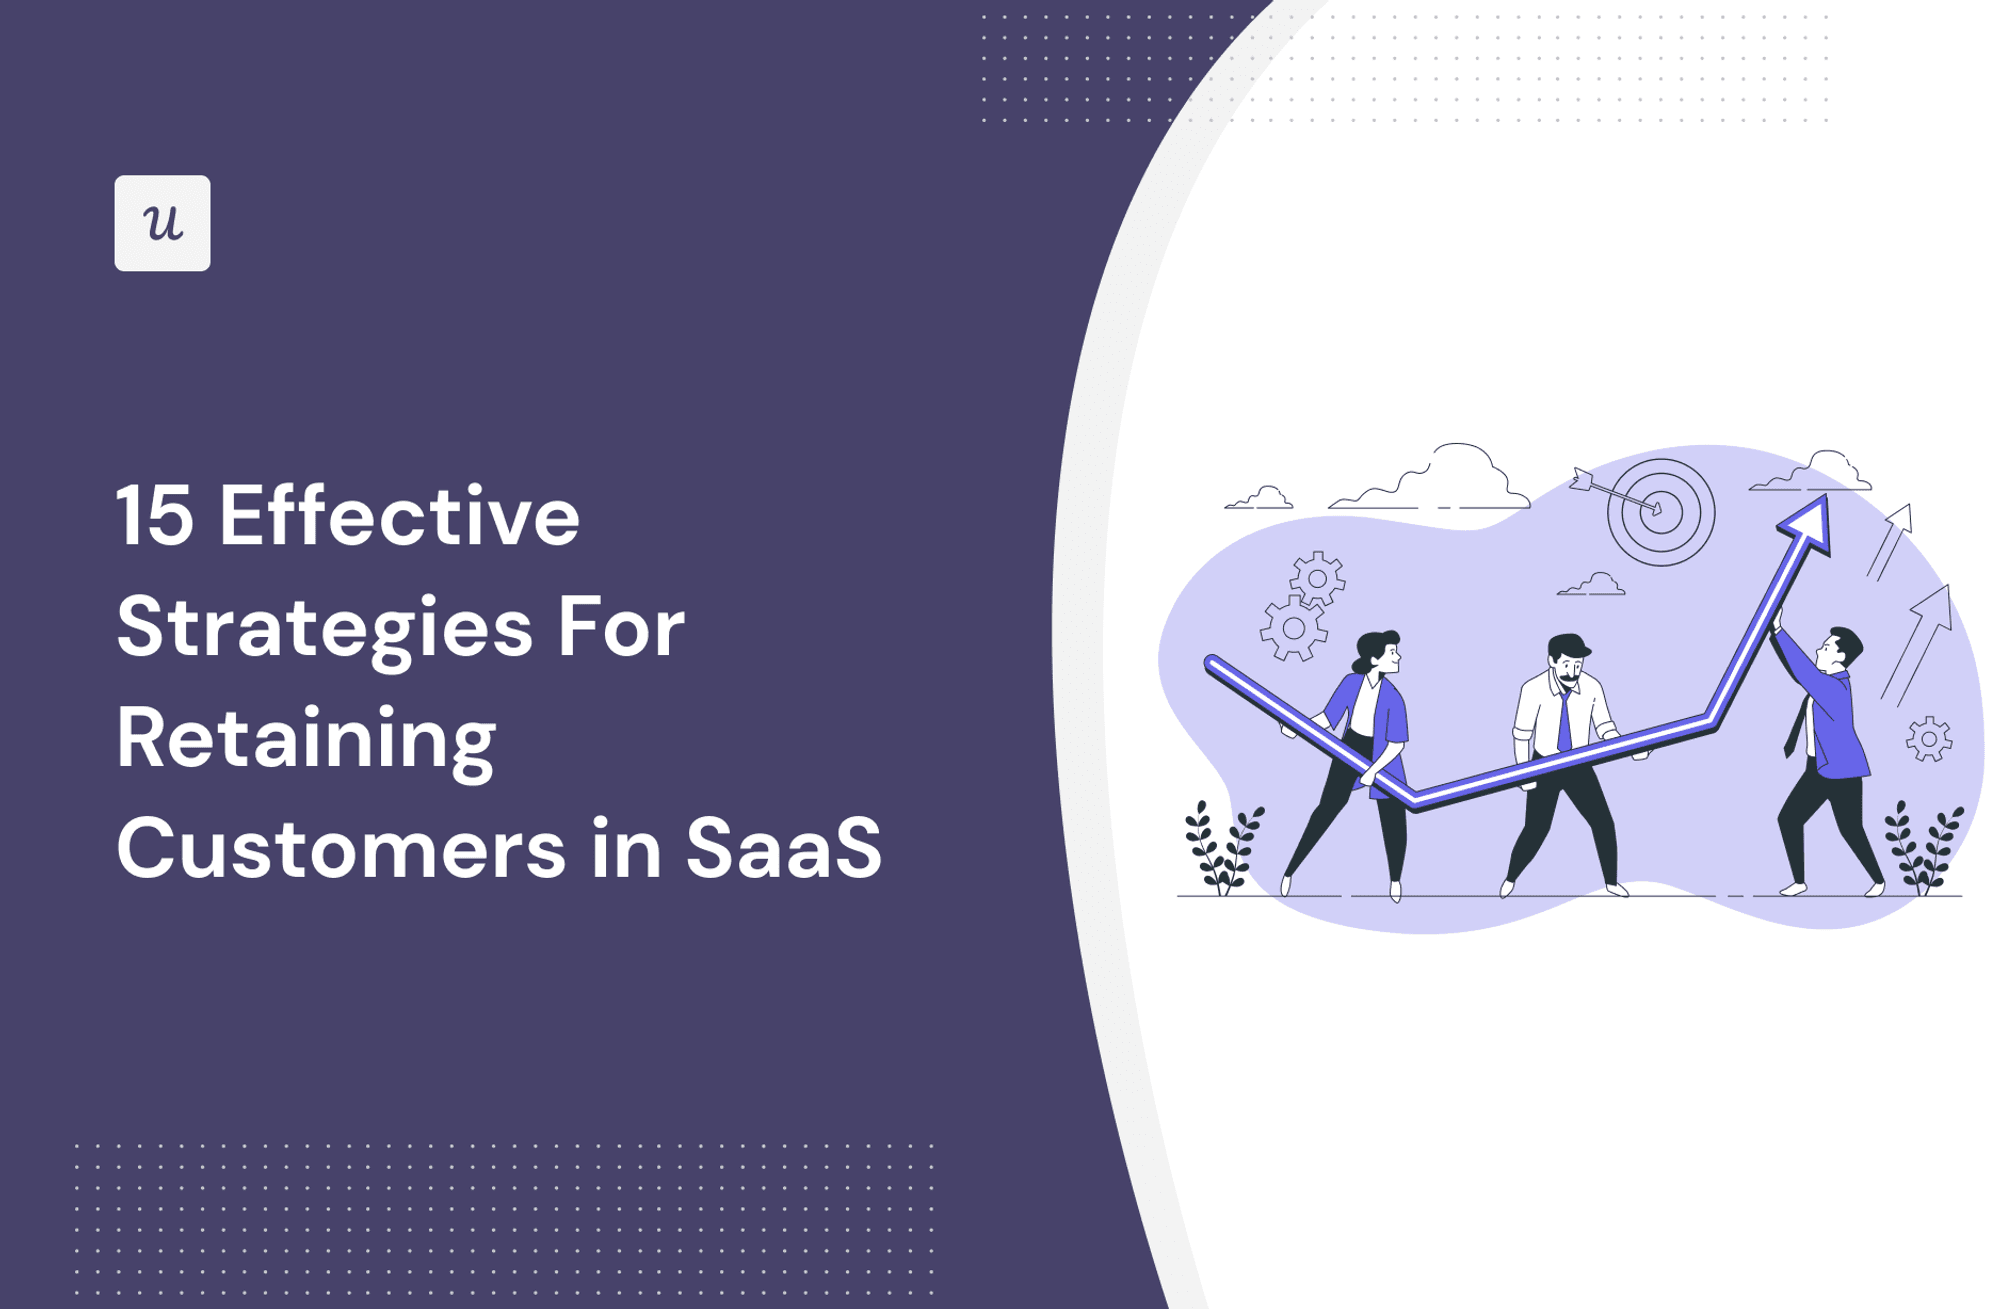 15 Effective Strategies For Retaining Customers in SaaS cover